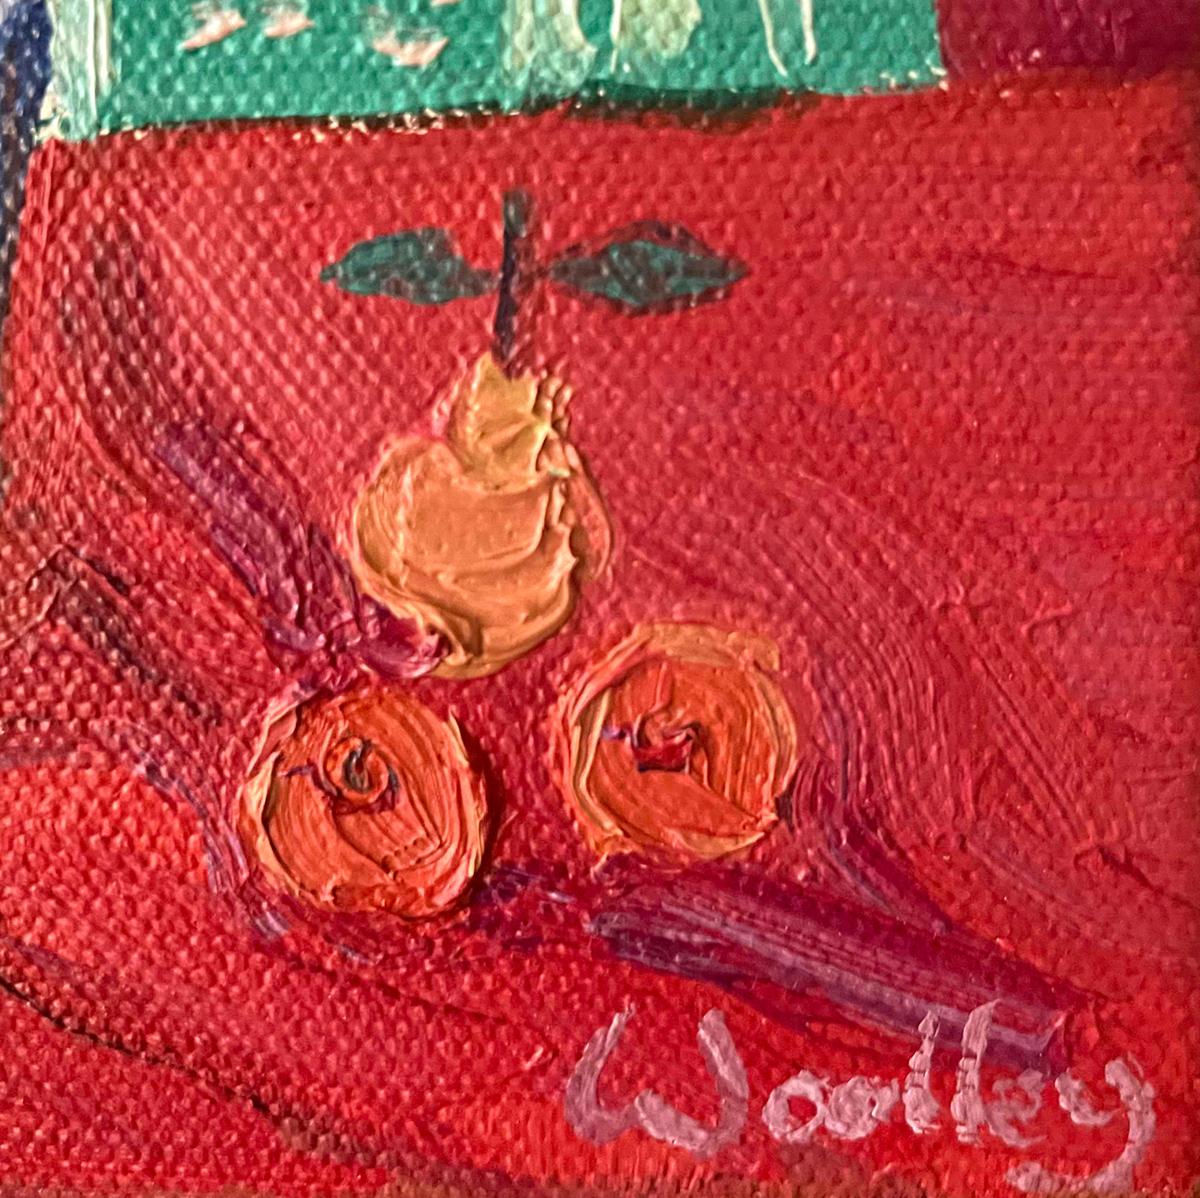 Still Life with Oranges and Owls is an Original Painting by Eleanor Woolley. Painted in the Artist's Gloucestershire Studio this miniature painting shows a still life of a selection of objects arranged by the Artist. Twos stone owls sit atop a stack